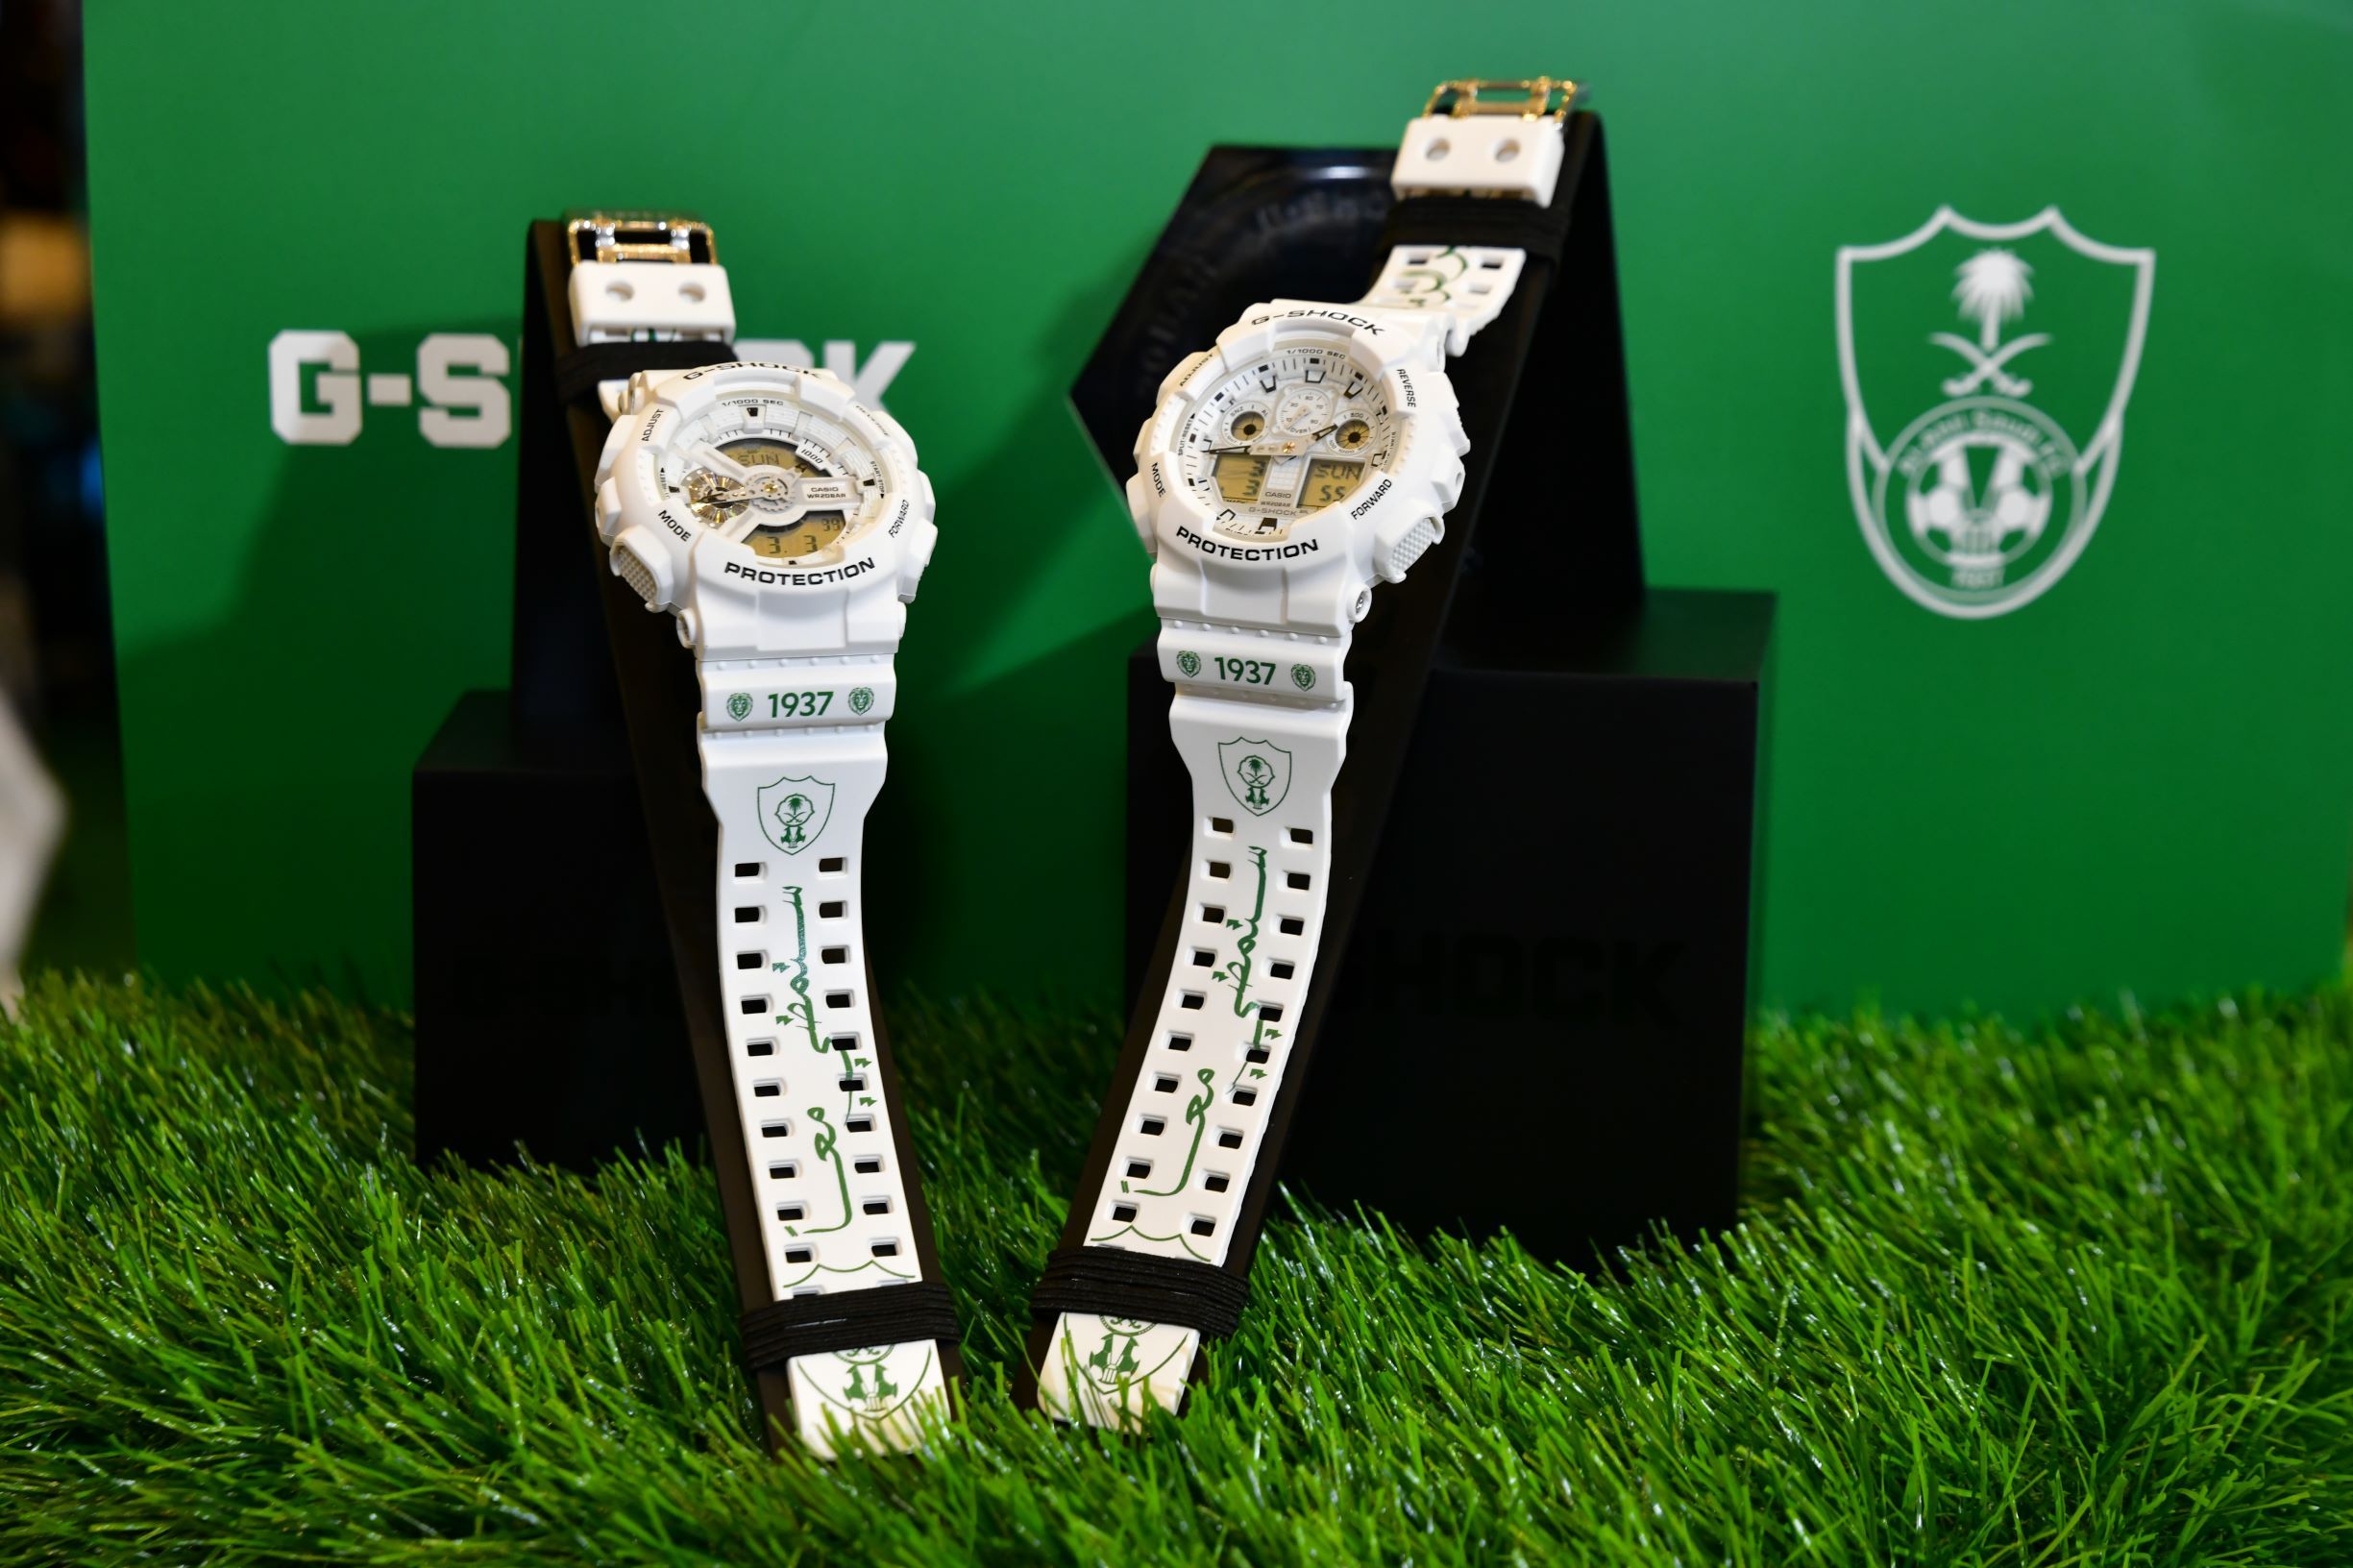 CASIO TEAMS UP WITH AL-AHLI SAUDI FC TO CREATE LIMITED-EDITION TIMEPIECES